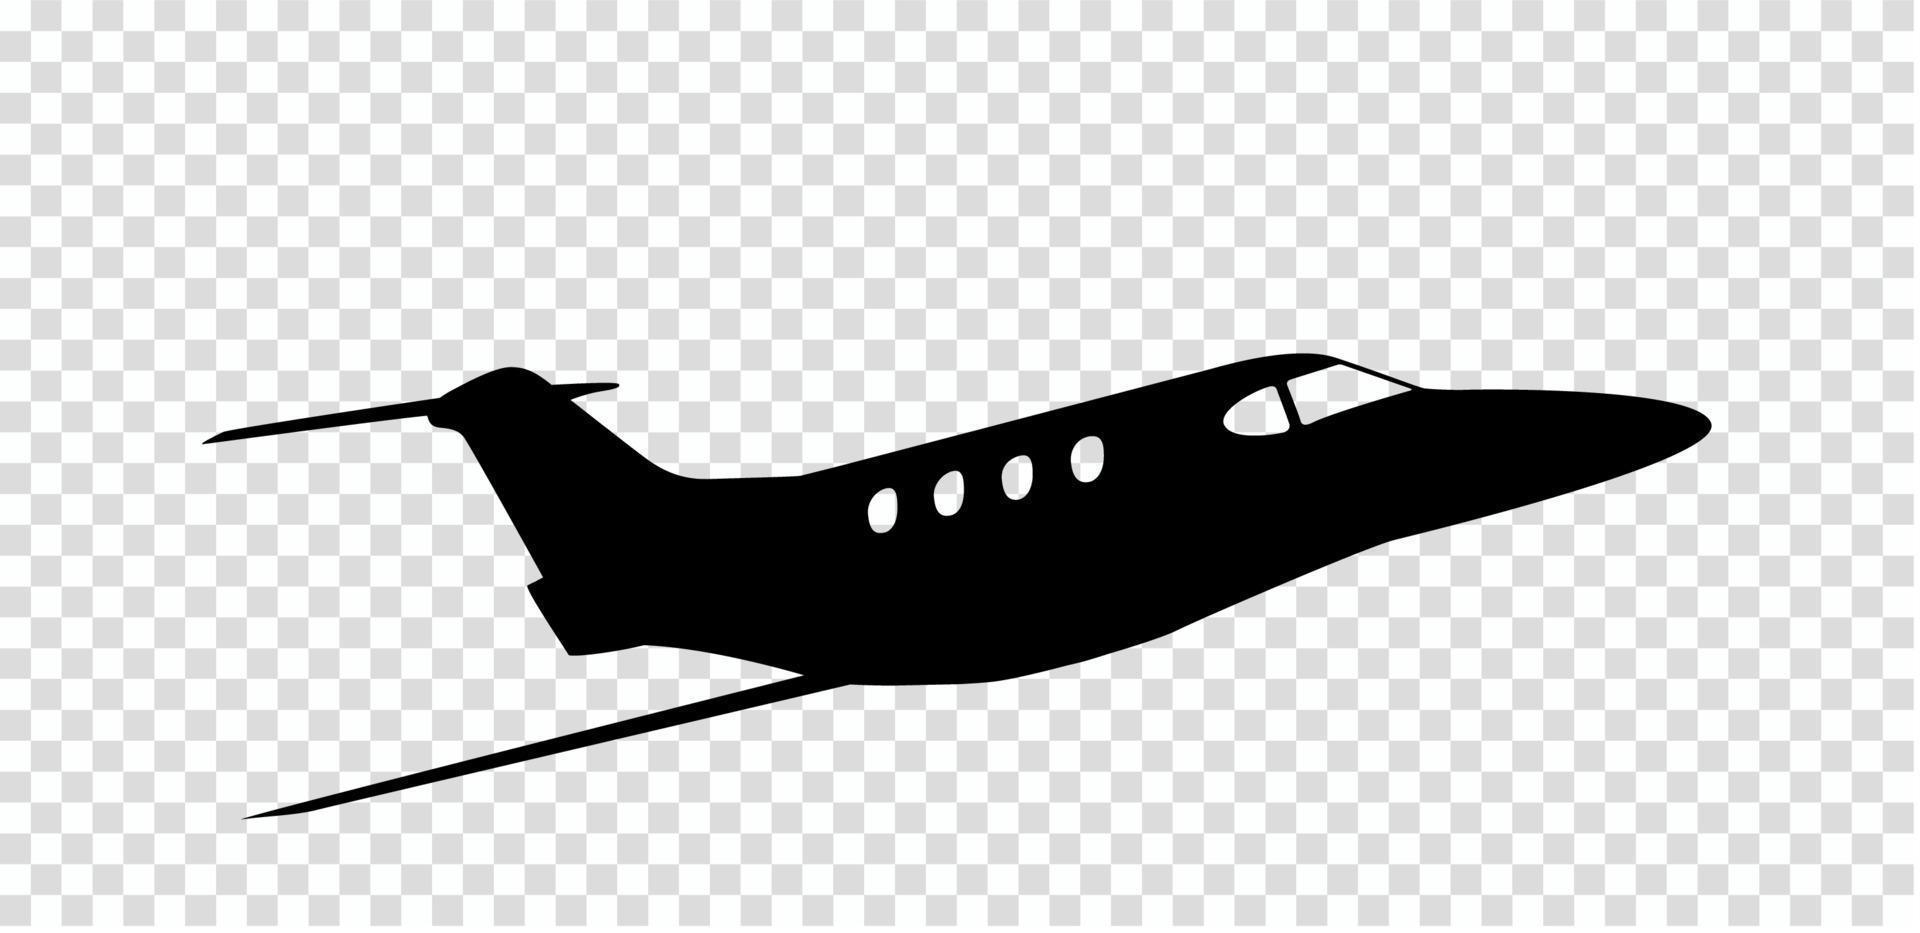 Sticker to car silhouette of airplane. Profession Pilot. Vector Illustration.